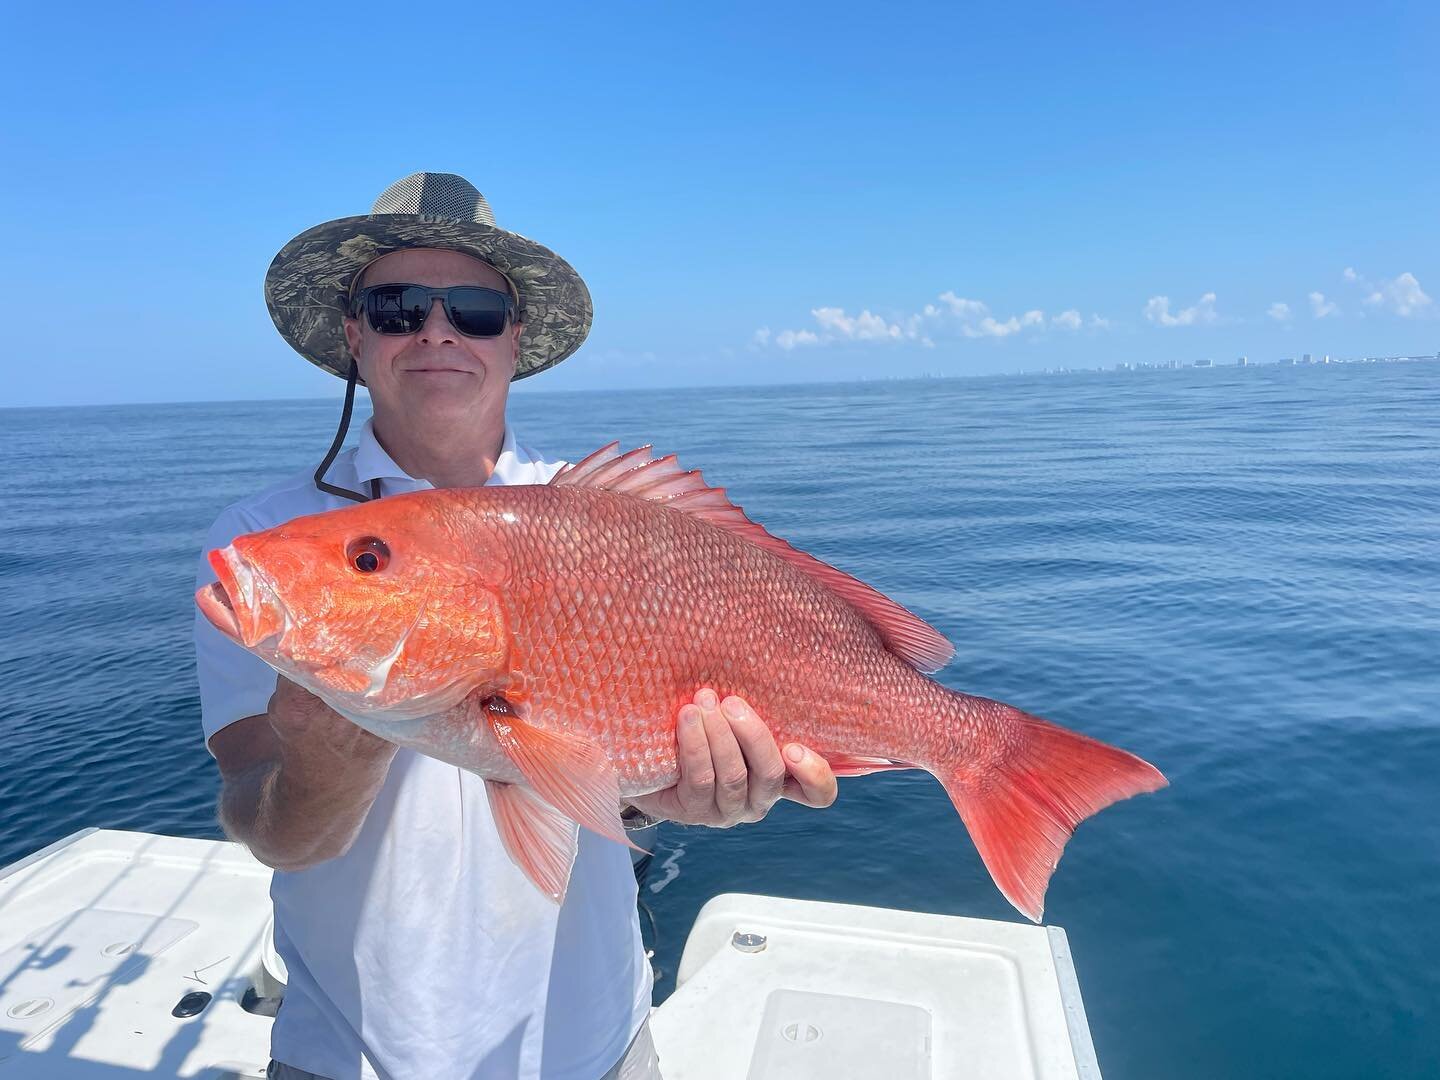 Thankful for calm weather that permits us to make it a few miles out in the gulf. Days like these allow us to catch some fish on the  inshore shallow water wrecks!

&thinsp;
Call and book your fishing trip now!!&thinsp;
(𝟖𝟓𝟎)𝟖𝟗𝟔-𝟒𝟕𝟏𝟐&thinsp